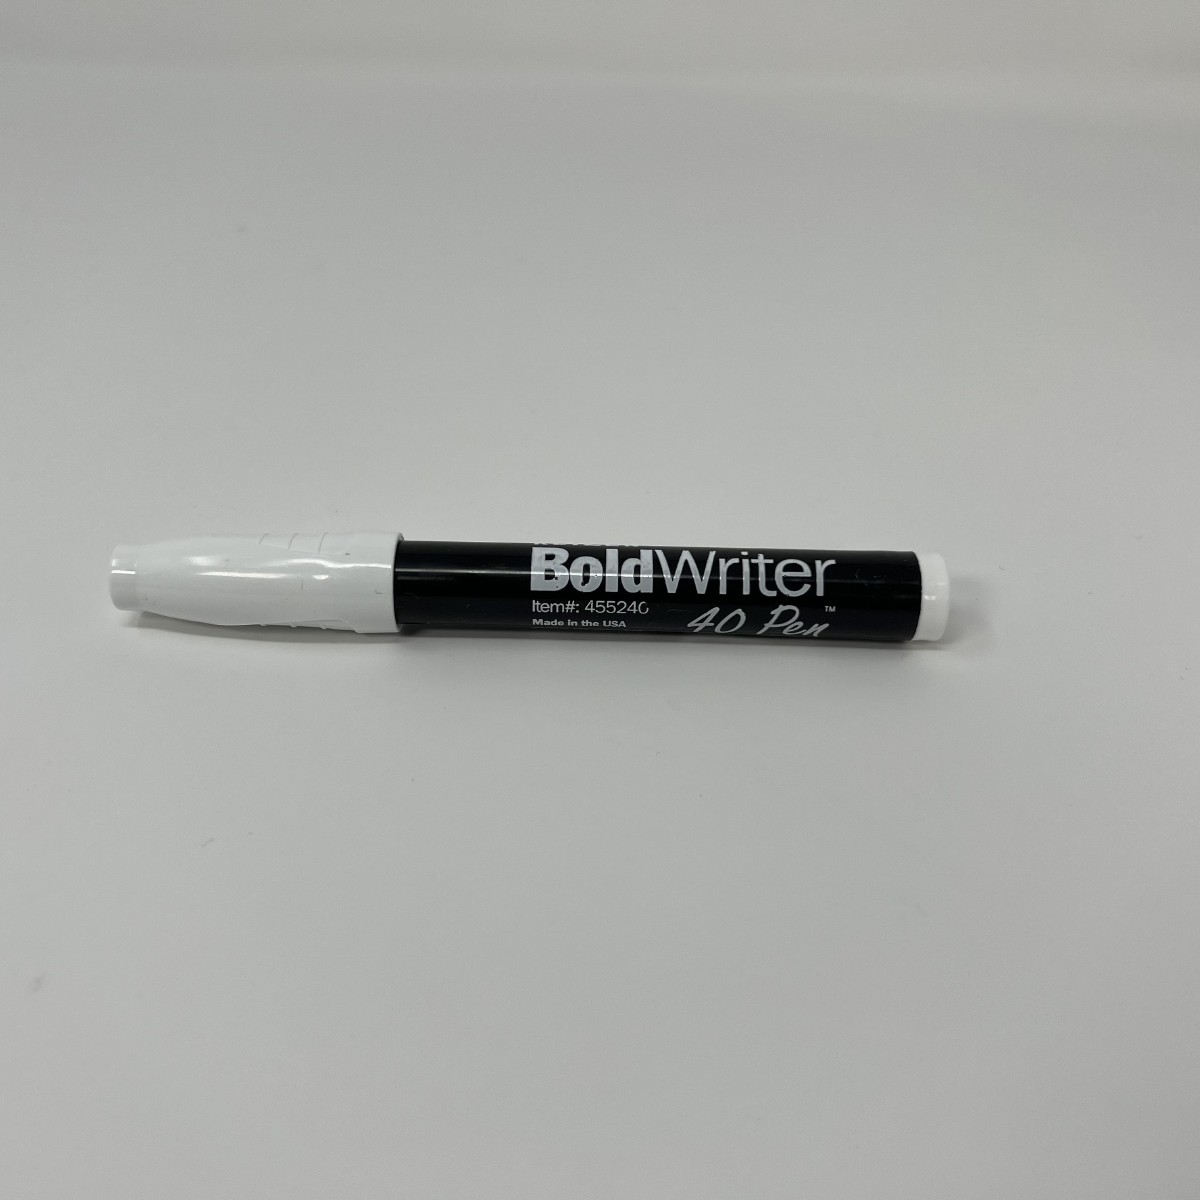 Larger picture of our BoldWriter 40 Pen